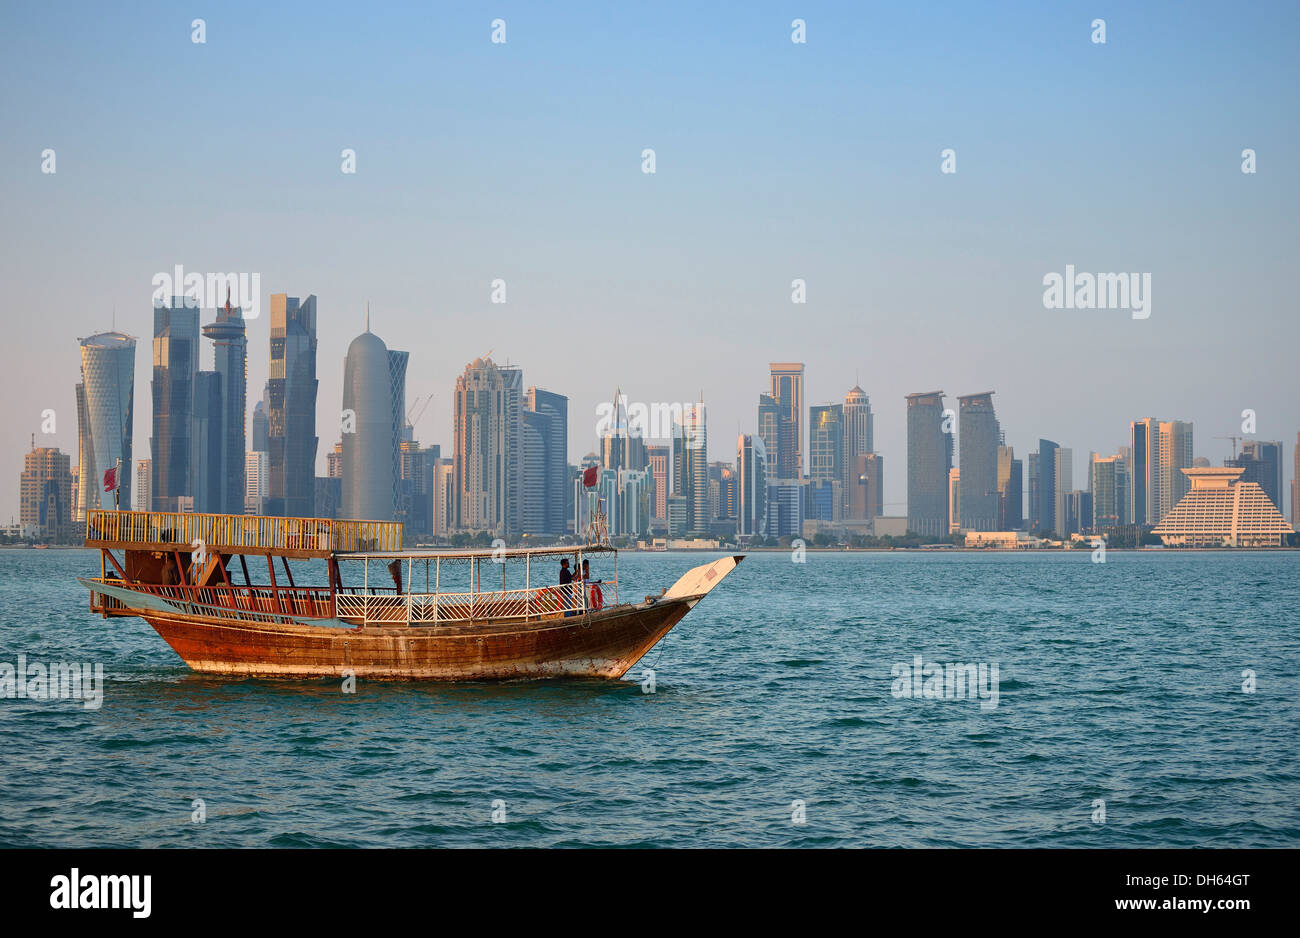 Tradition and modernity in comparison, dhow, a wooden cargo ship, in the evening light in front of the skyline of Doha Stock Photo